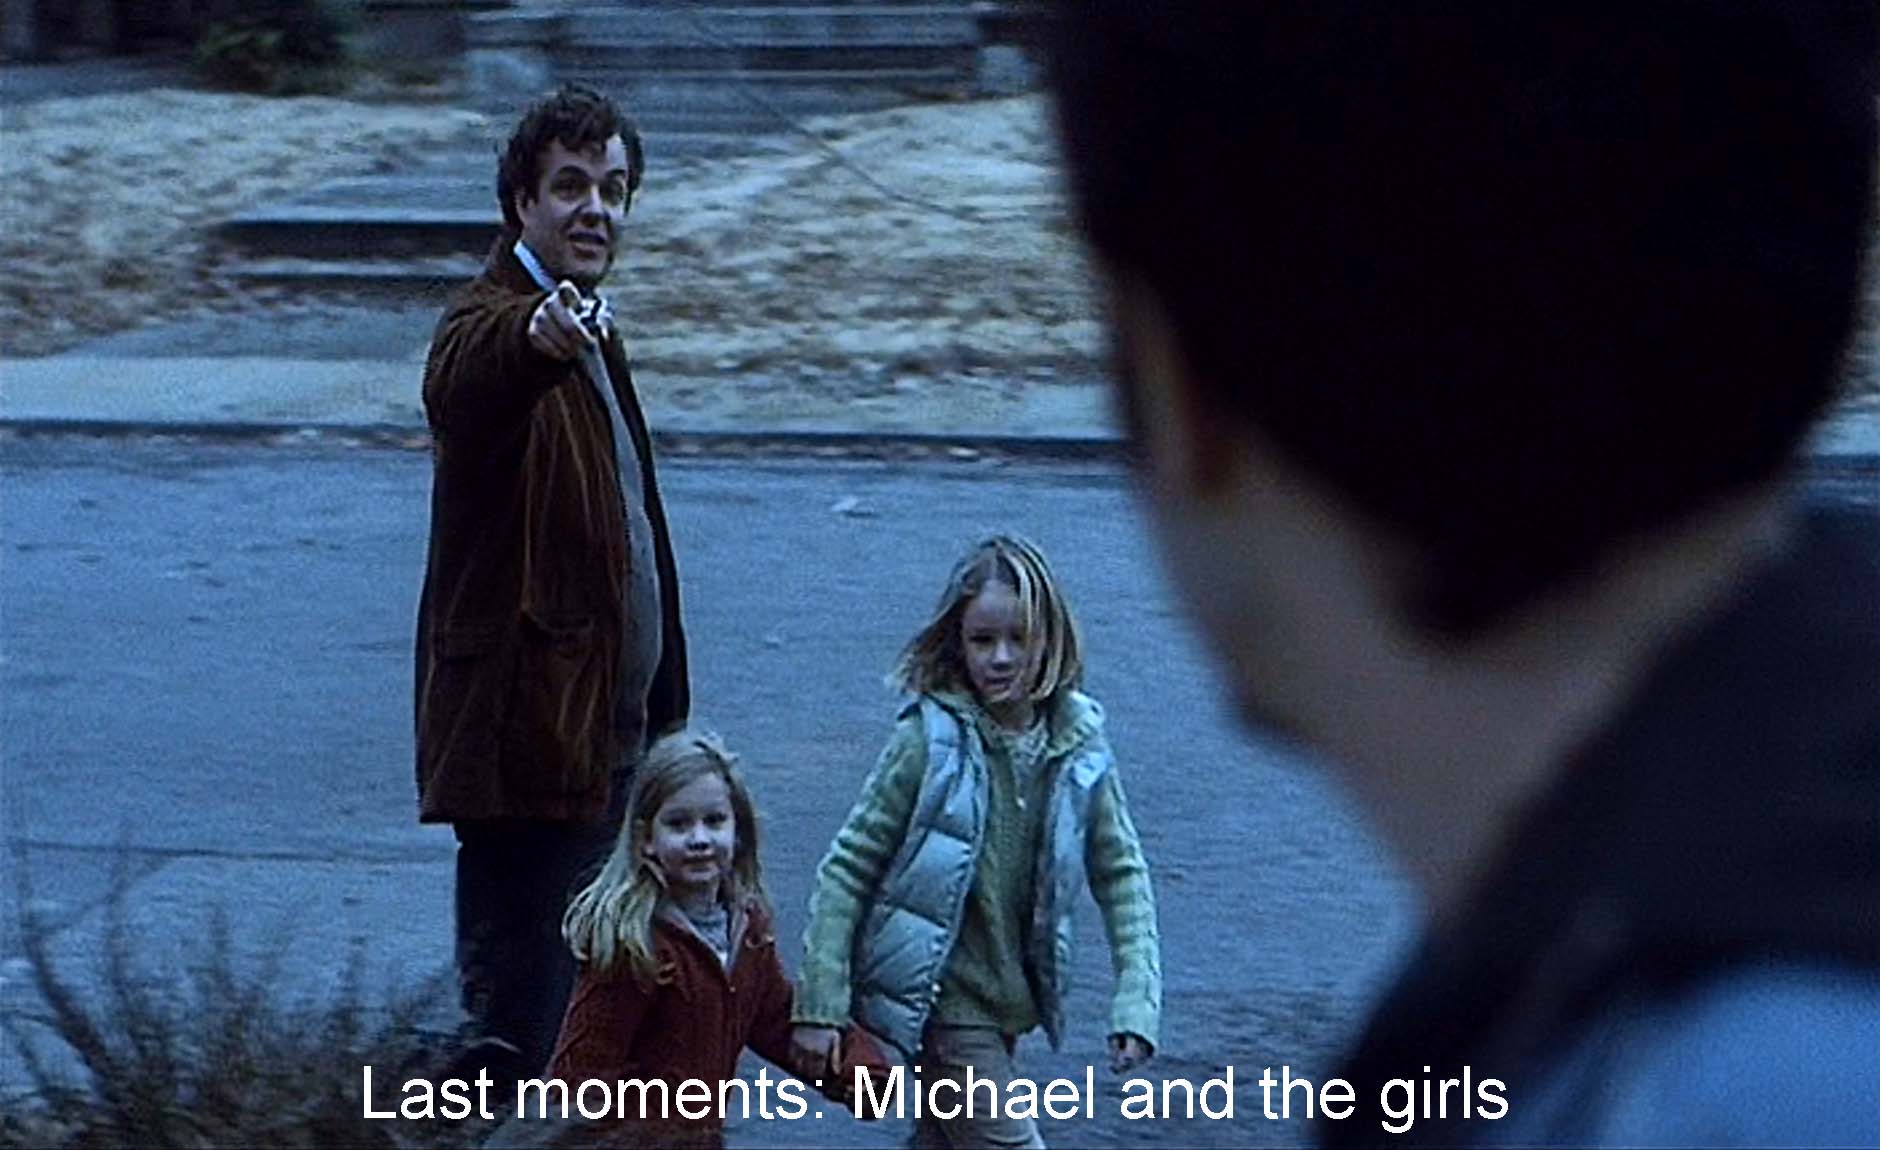  Last moments: Michael and the girls